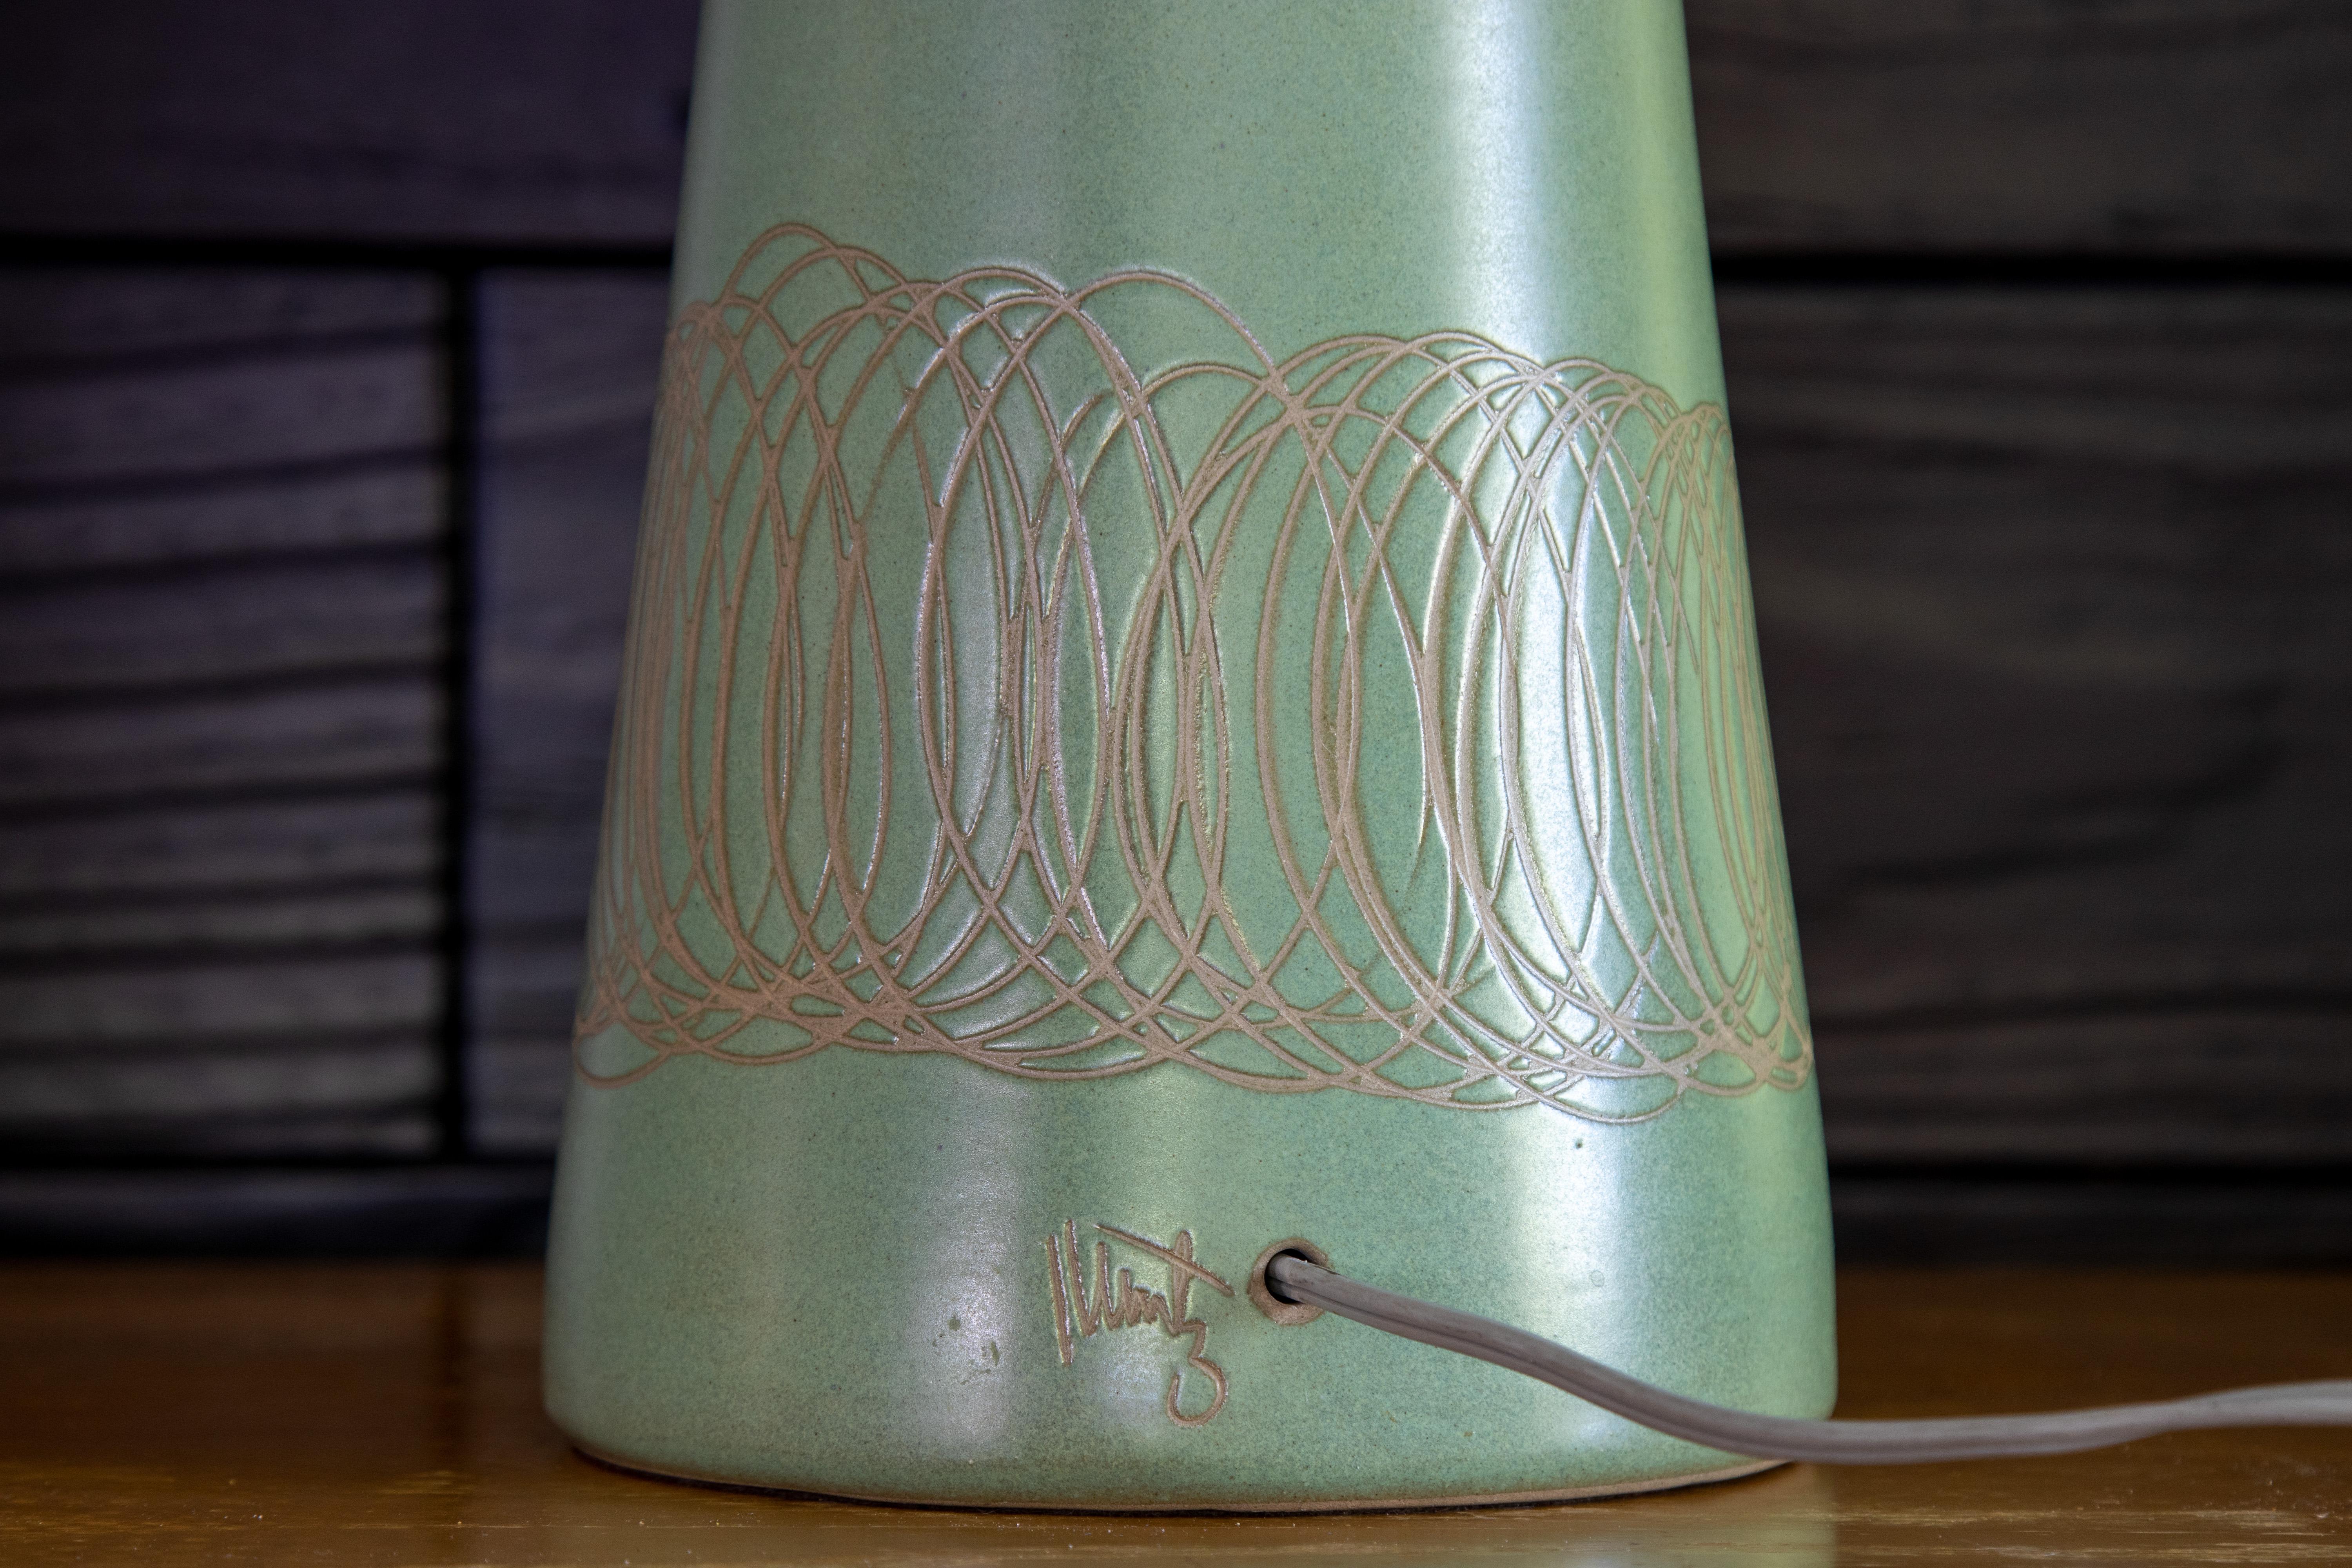 Pair of Jane and Gordon Martz Lamps in Seafoam Green with Tan Incising 1